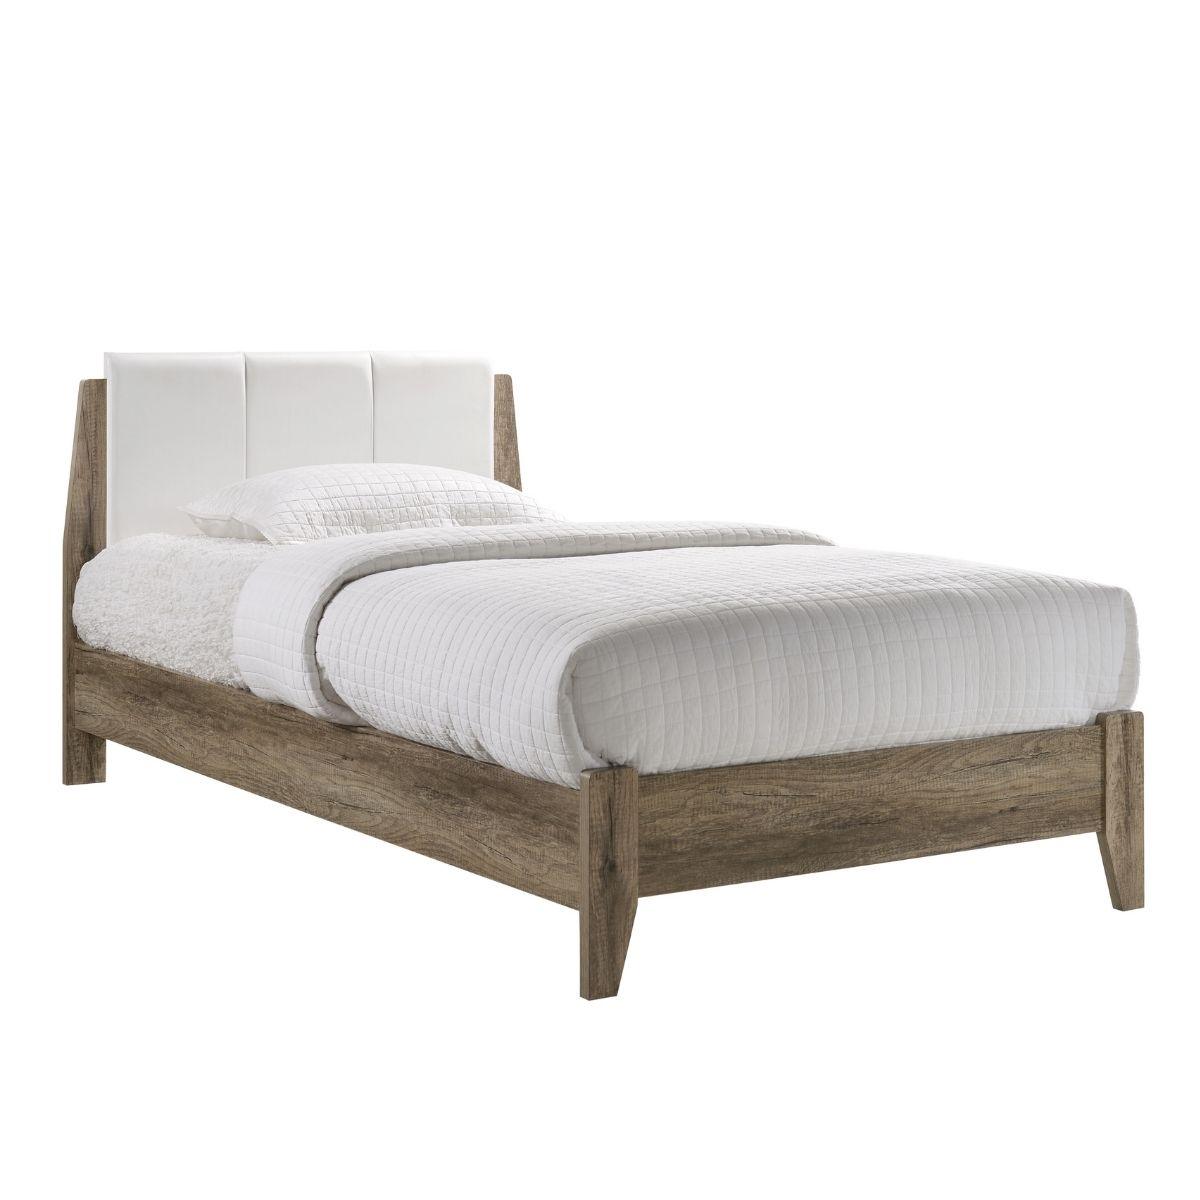 Wooden Bed Frame with Leather Upholstered Bed Head Size King